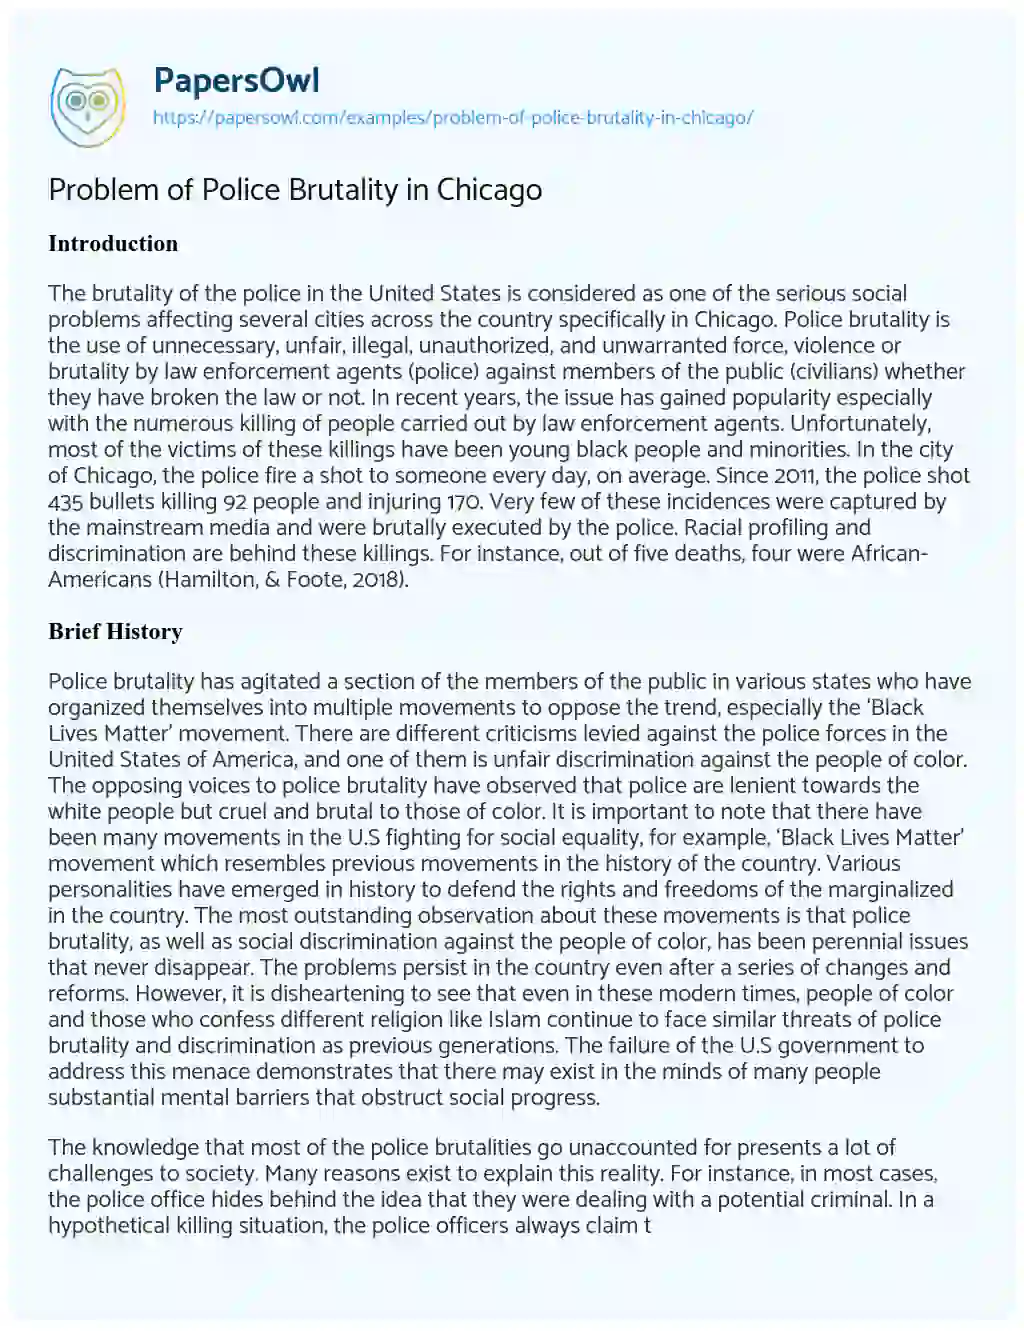 Essay on Problem of Police Brutality in Chicago